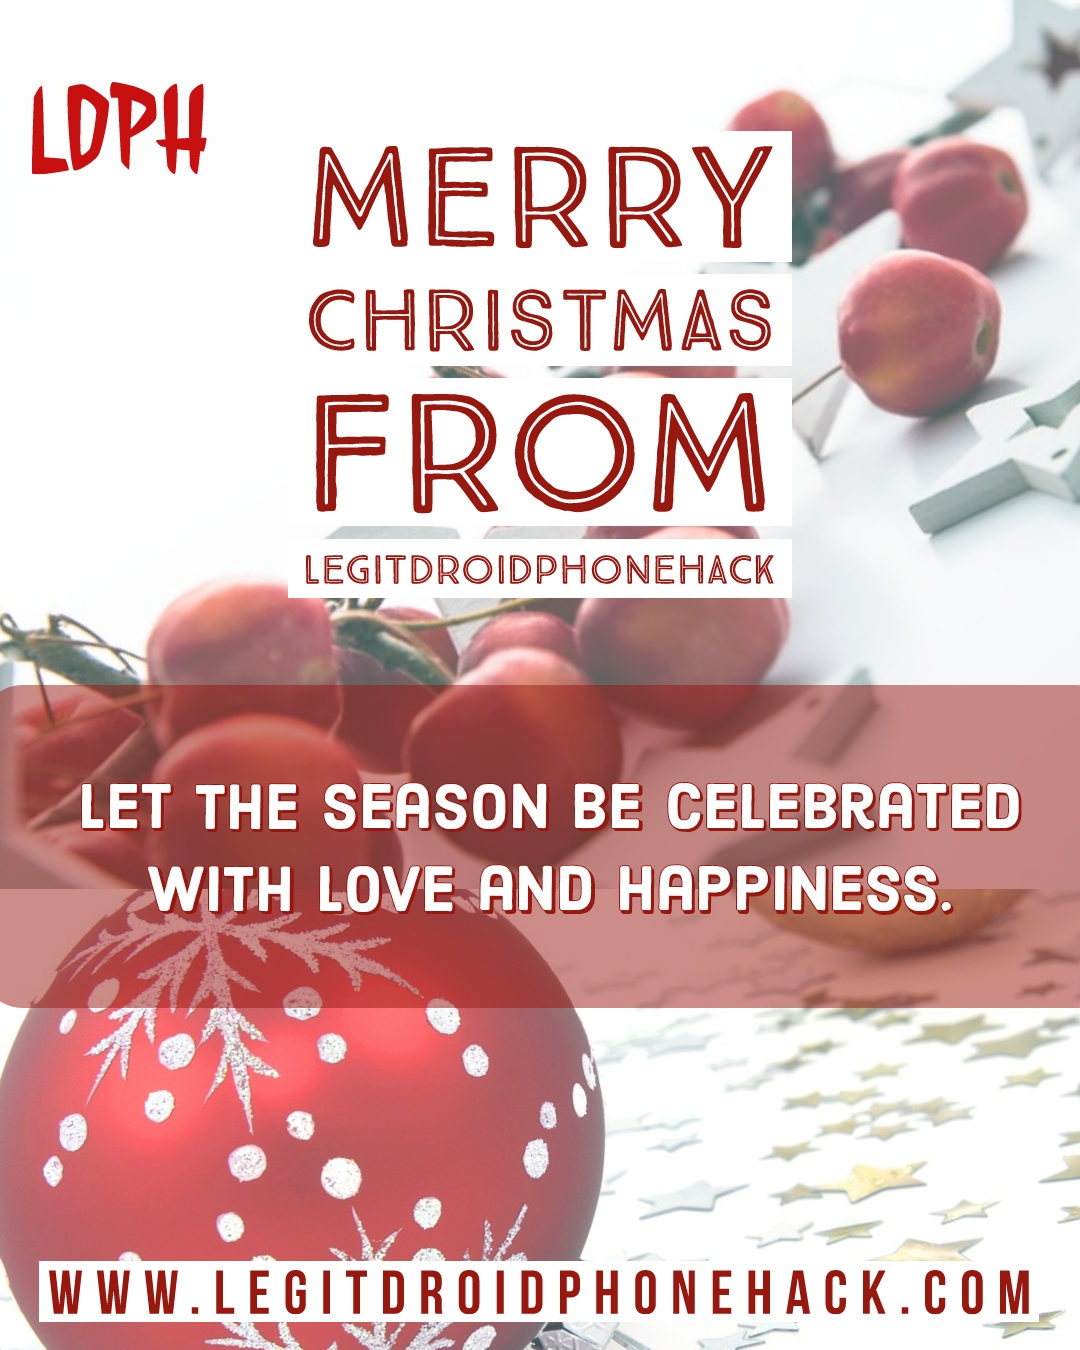 Merry Christmas Wish And Freebies From LDPH